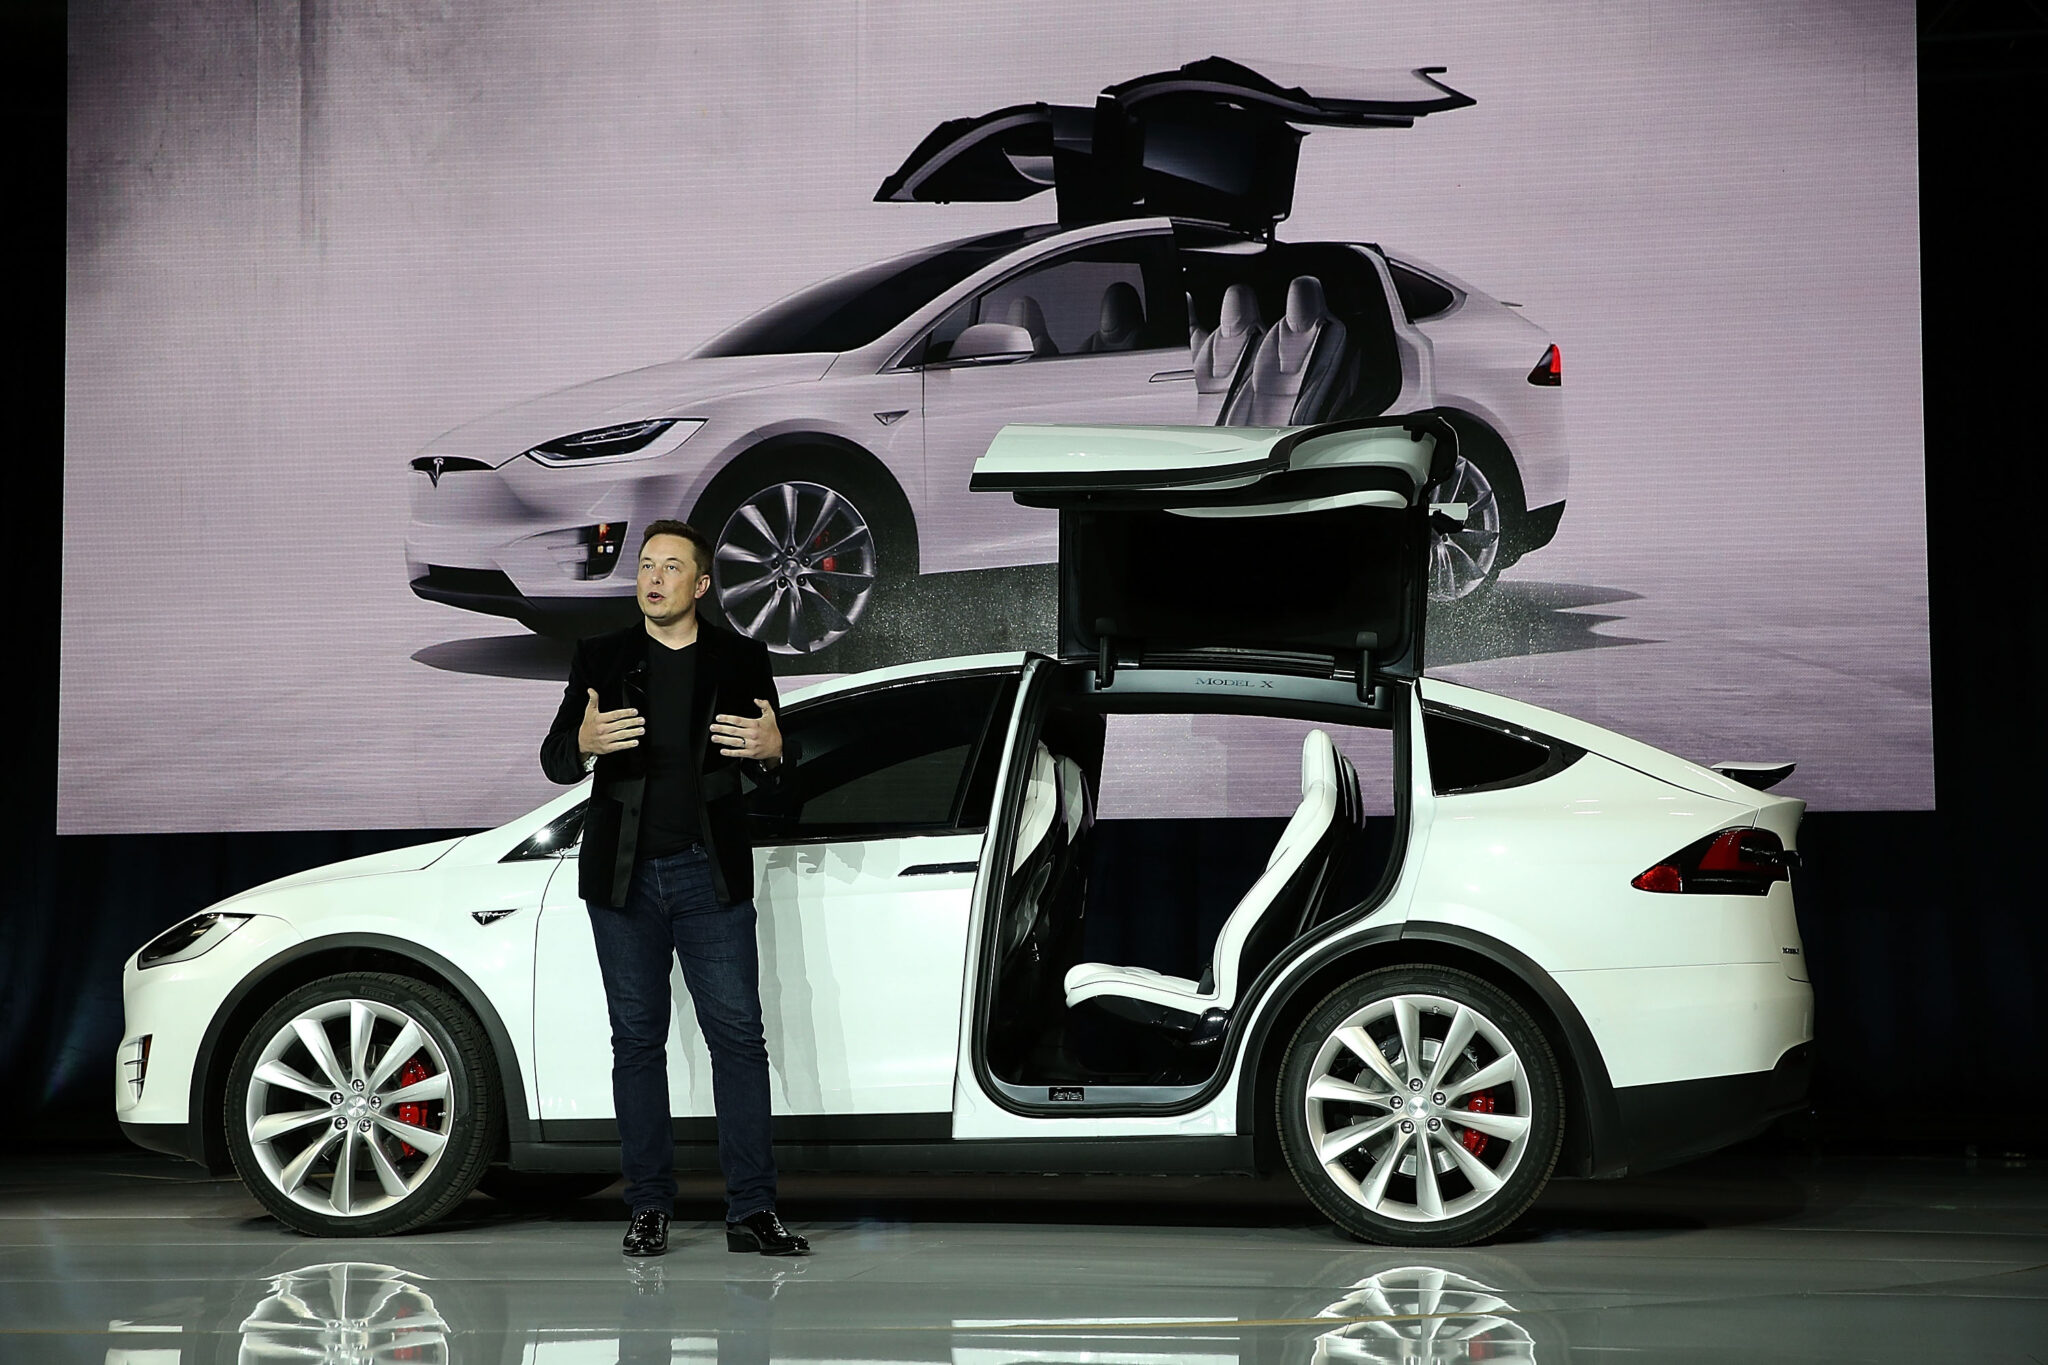 FREMONT, CA - SEPTEMBER 29:  Tesla CEO Elon Musk speaks during an event to launch the new Tesla Model X Crossover SUV on September 29, 2015 in Fremont, California. After several production delays, Elon Musk officially launched the much anticipated Tesla Model X Crossover SUV. The  (Photo by Justin Sullivan/Getty Images)